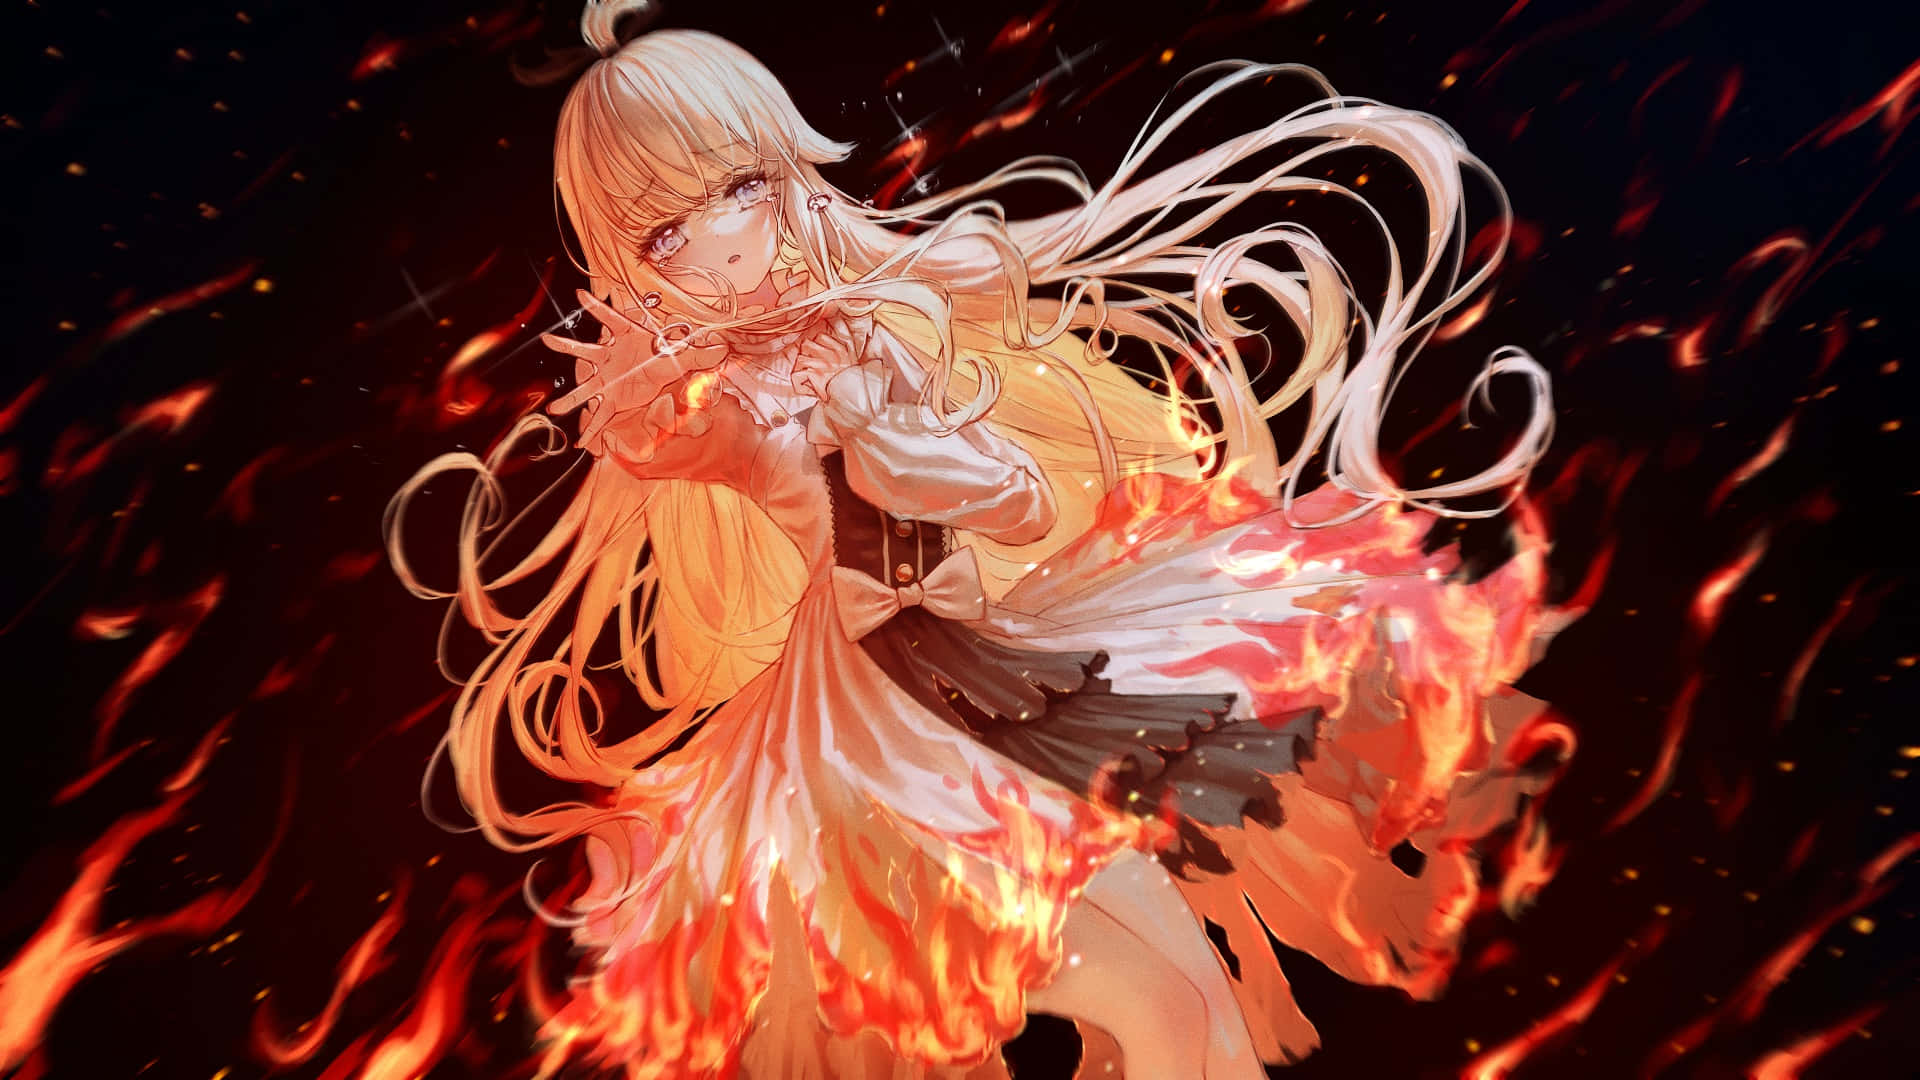 Fire Anime Wallpapers - Wallpaper Cave